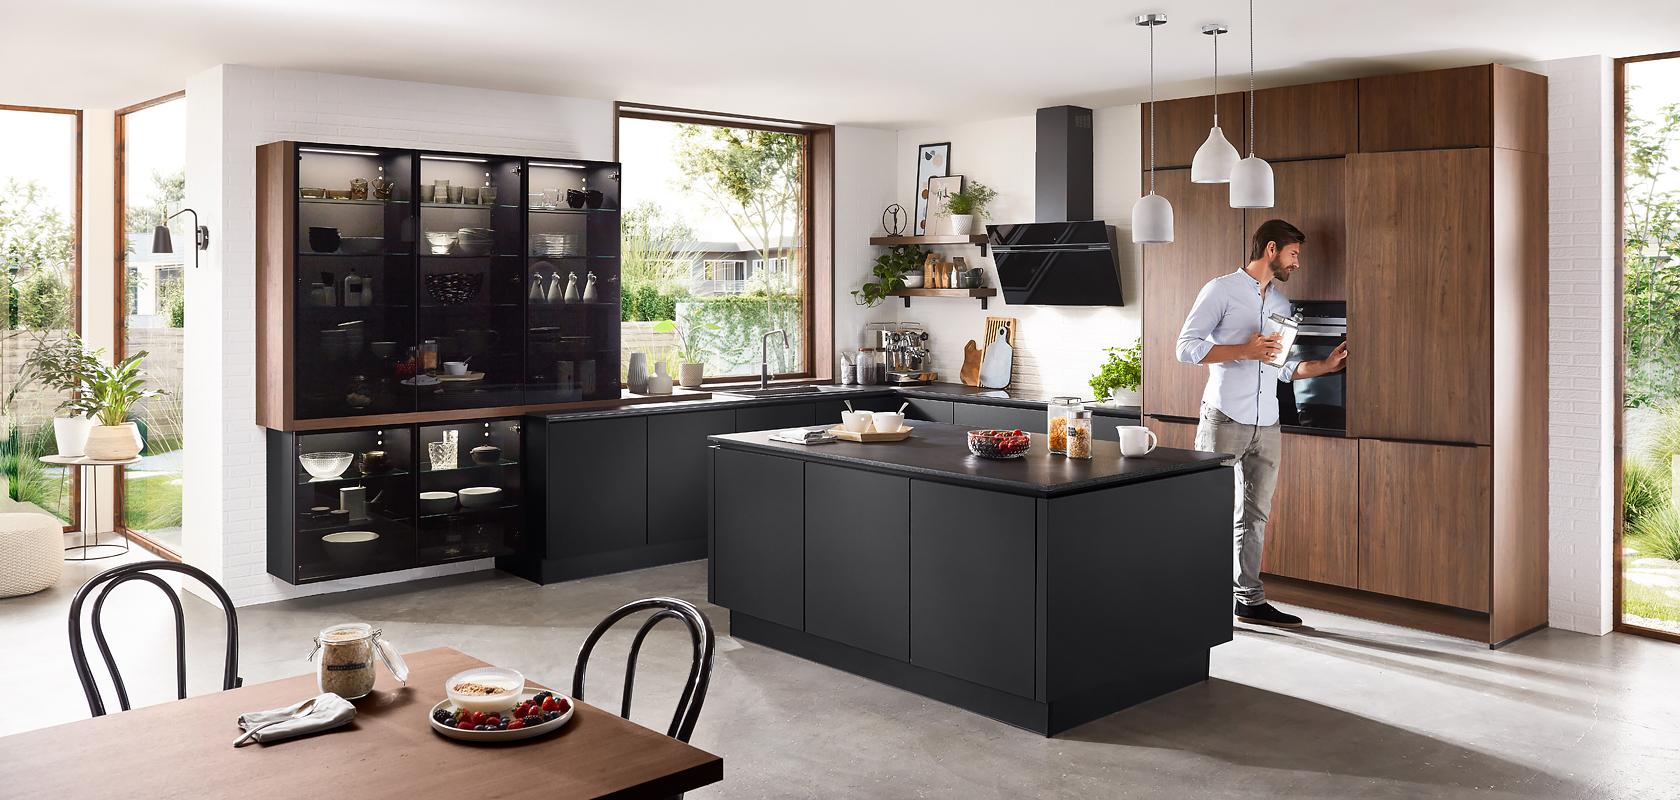 Modern kitchen interior with sleek black cabinetry, wooden accents, and a man preparing a beverage on the countertop, providing a homely yet contemporary ambiance.